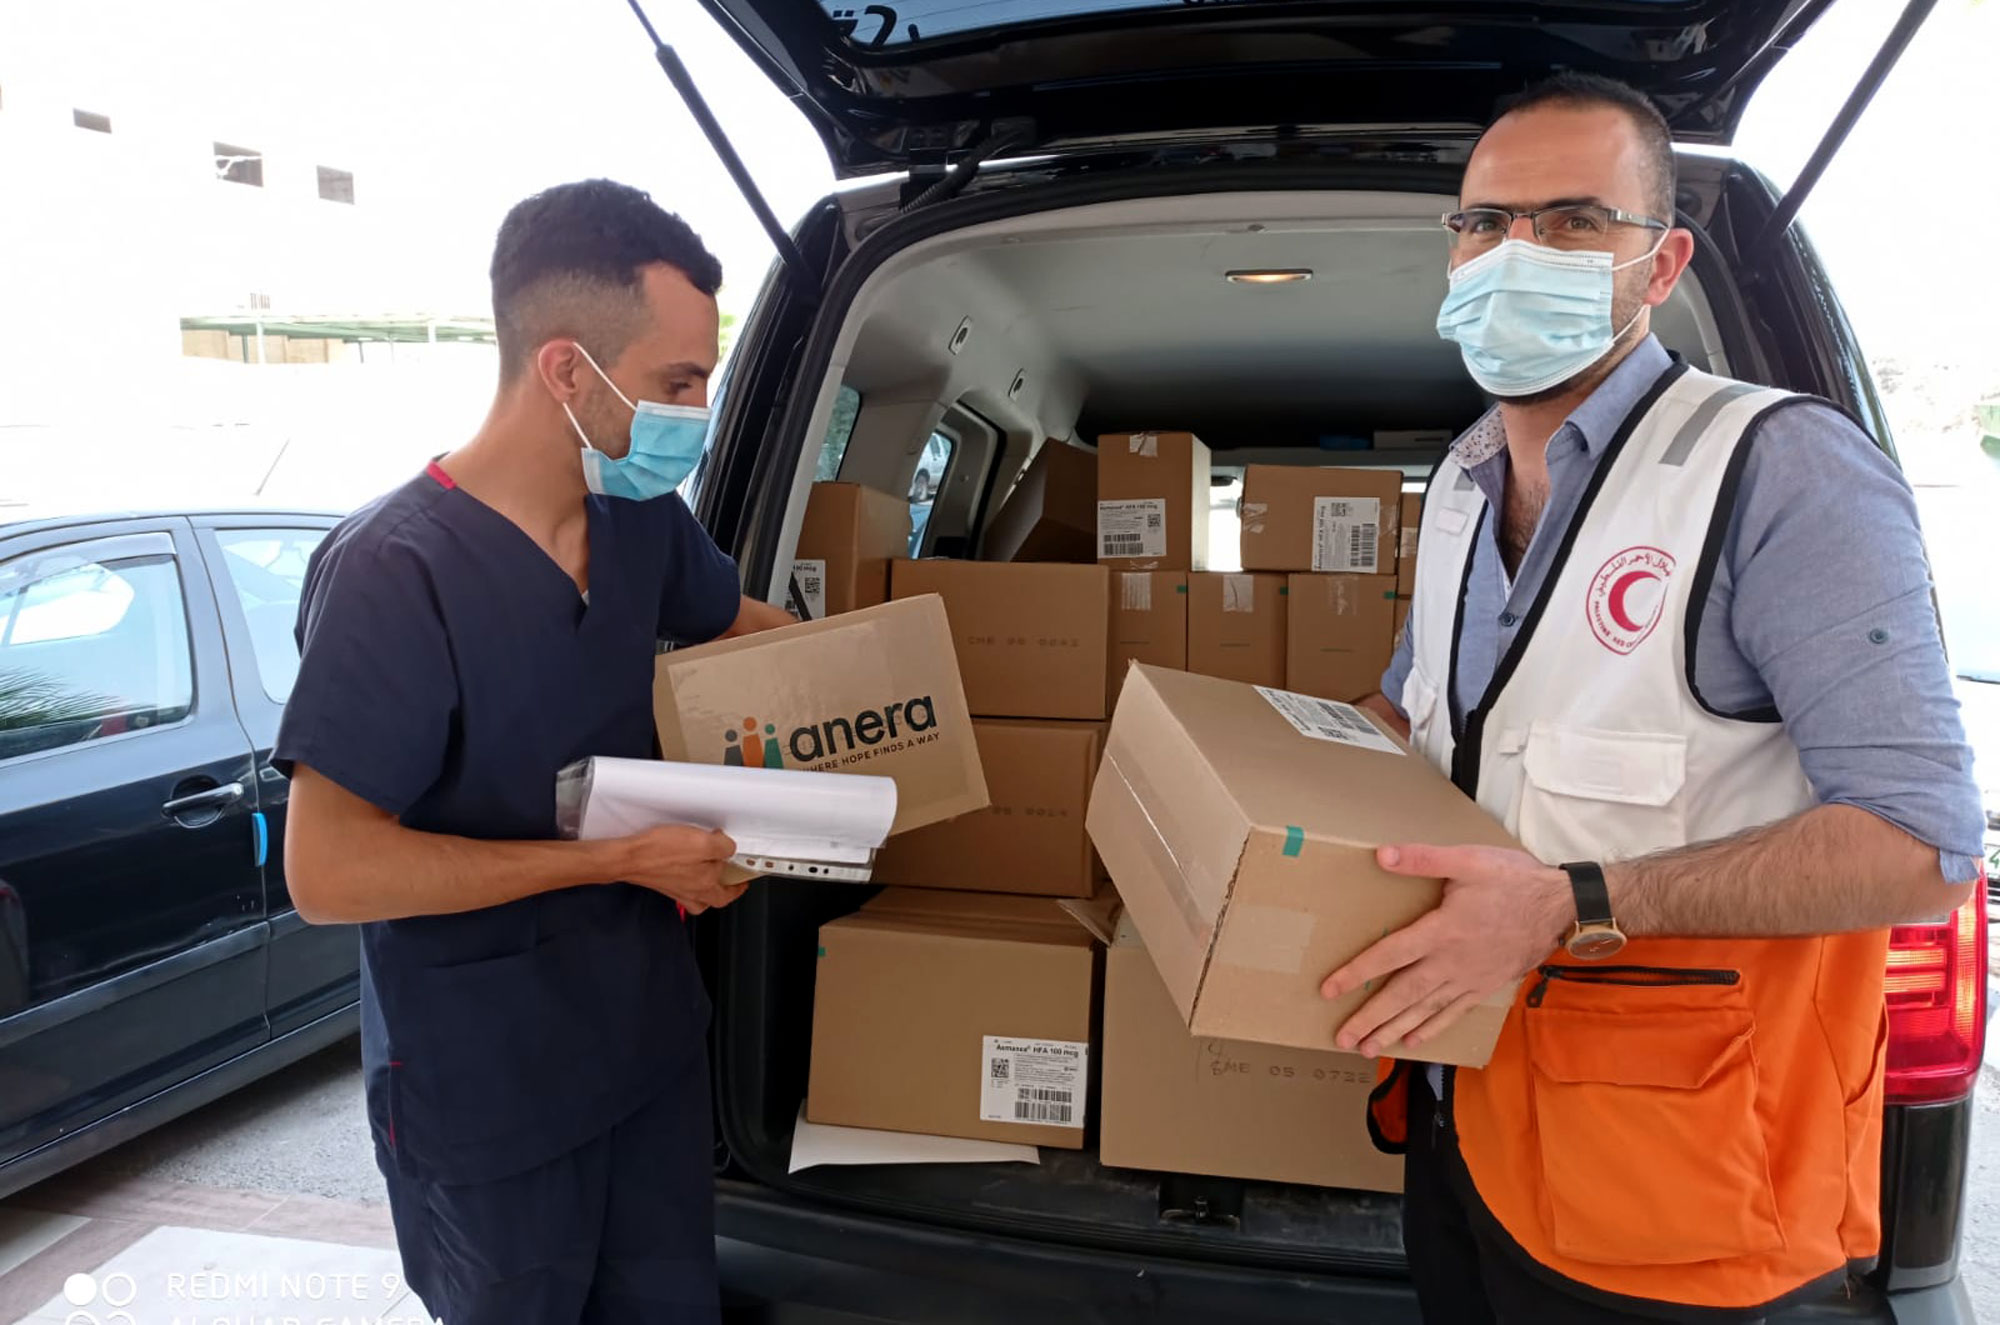 Anera unloads a Direct Relief shipment of medicines for the Palestinian Red Crescent clinic in the village of Dura.